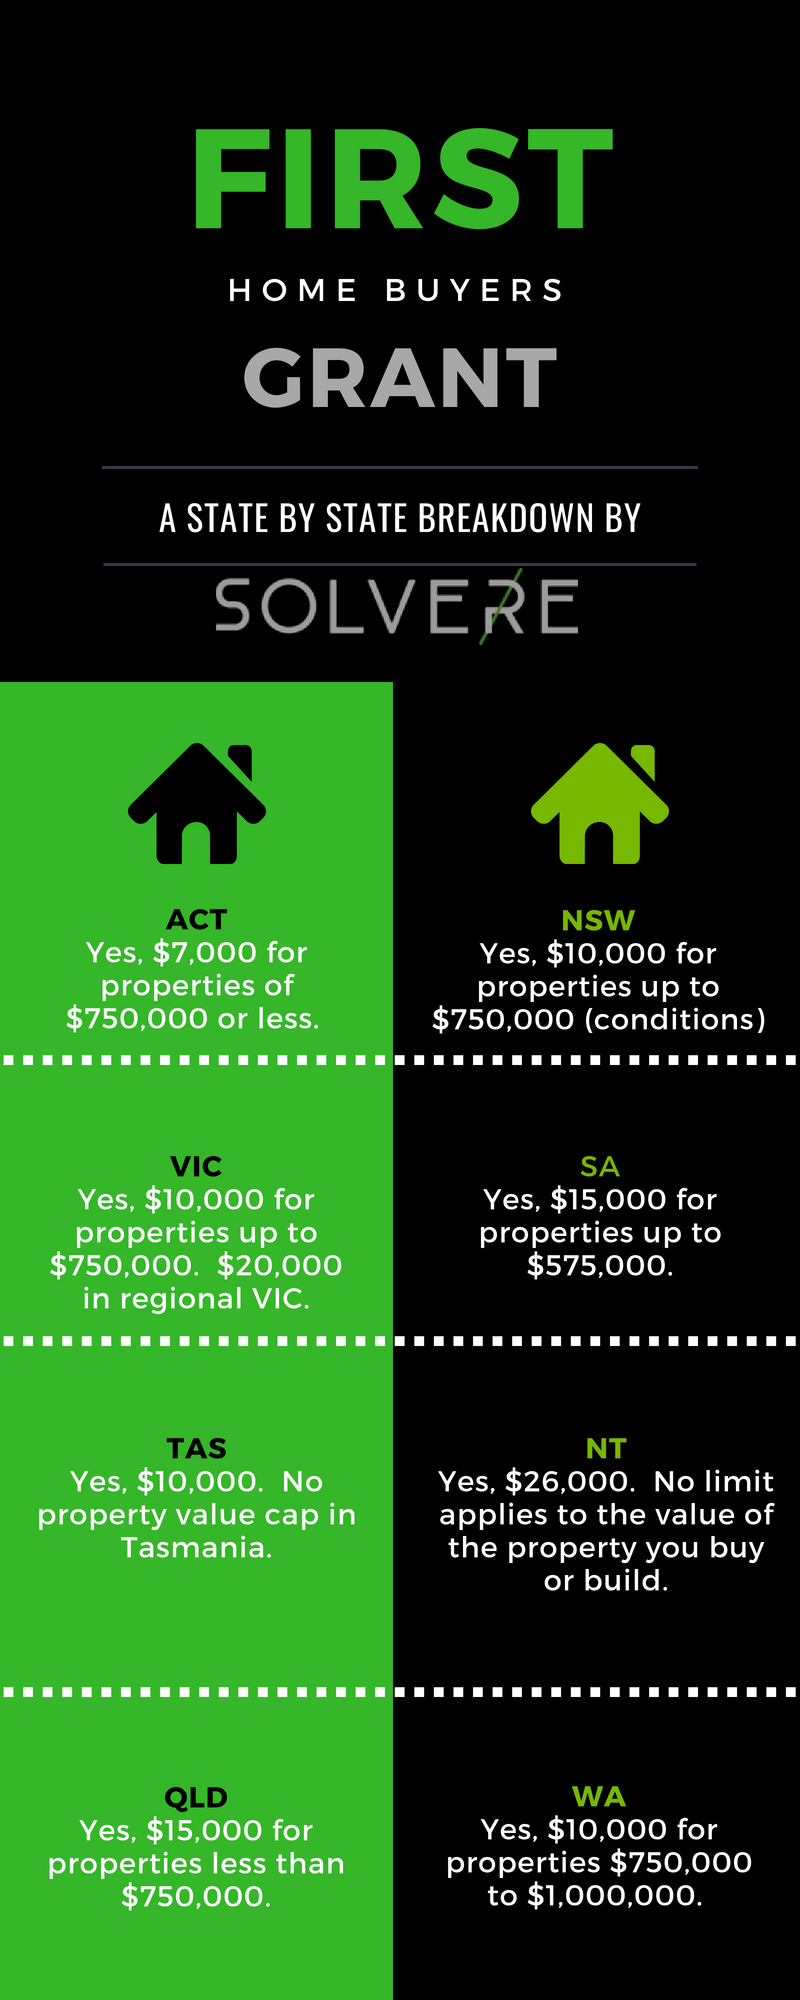 Everything you need to know about the First Home Buyers Grant Solvere